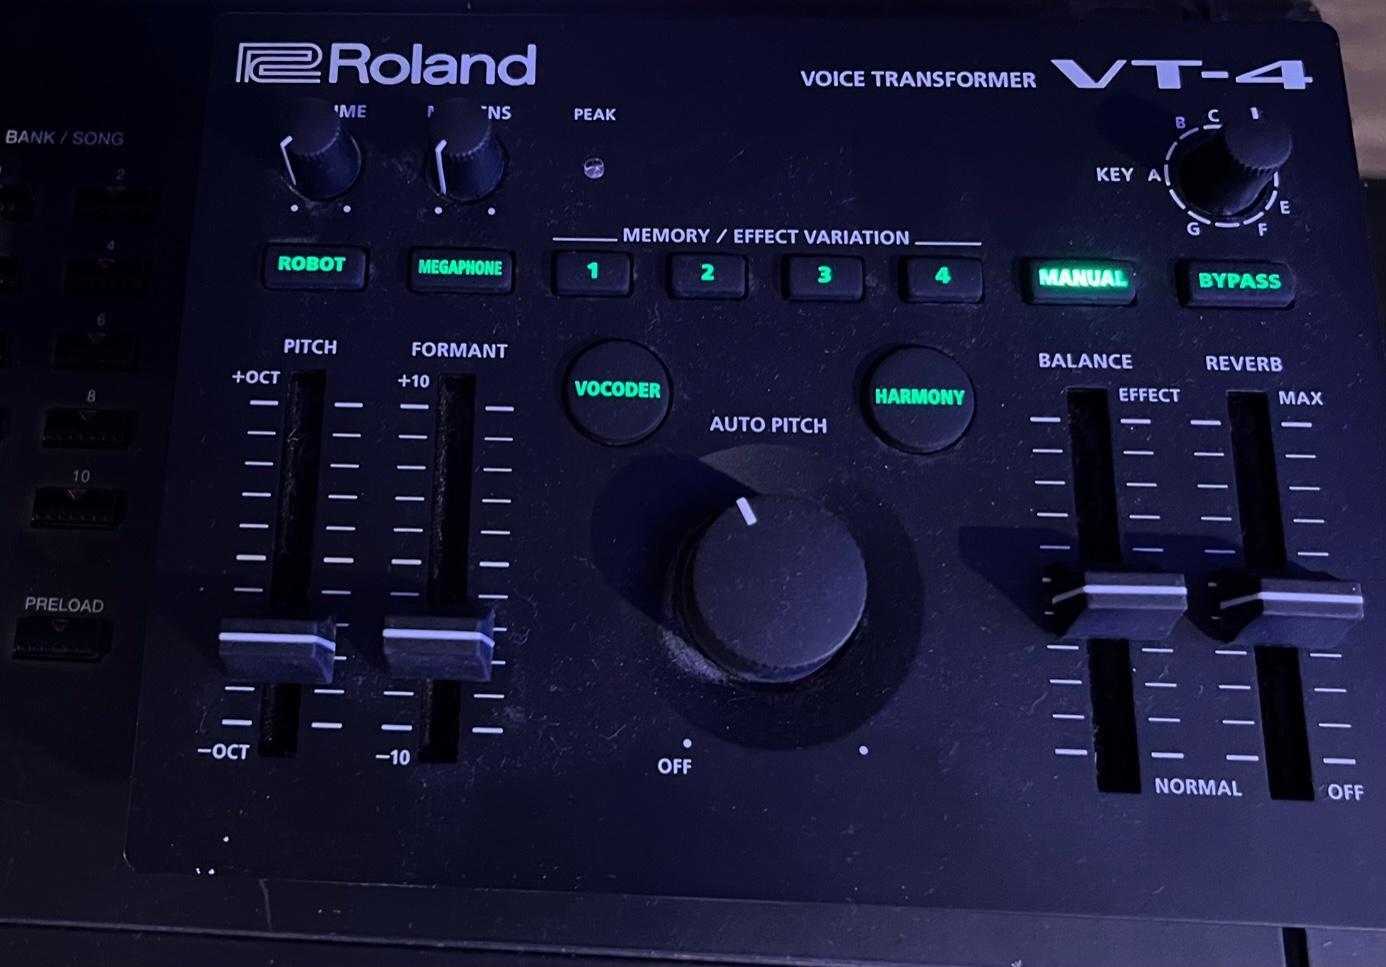 Used Roland VT-4 Voice Transformer & - Sweetwater's Gear Exchange